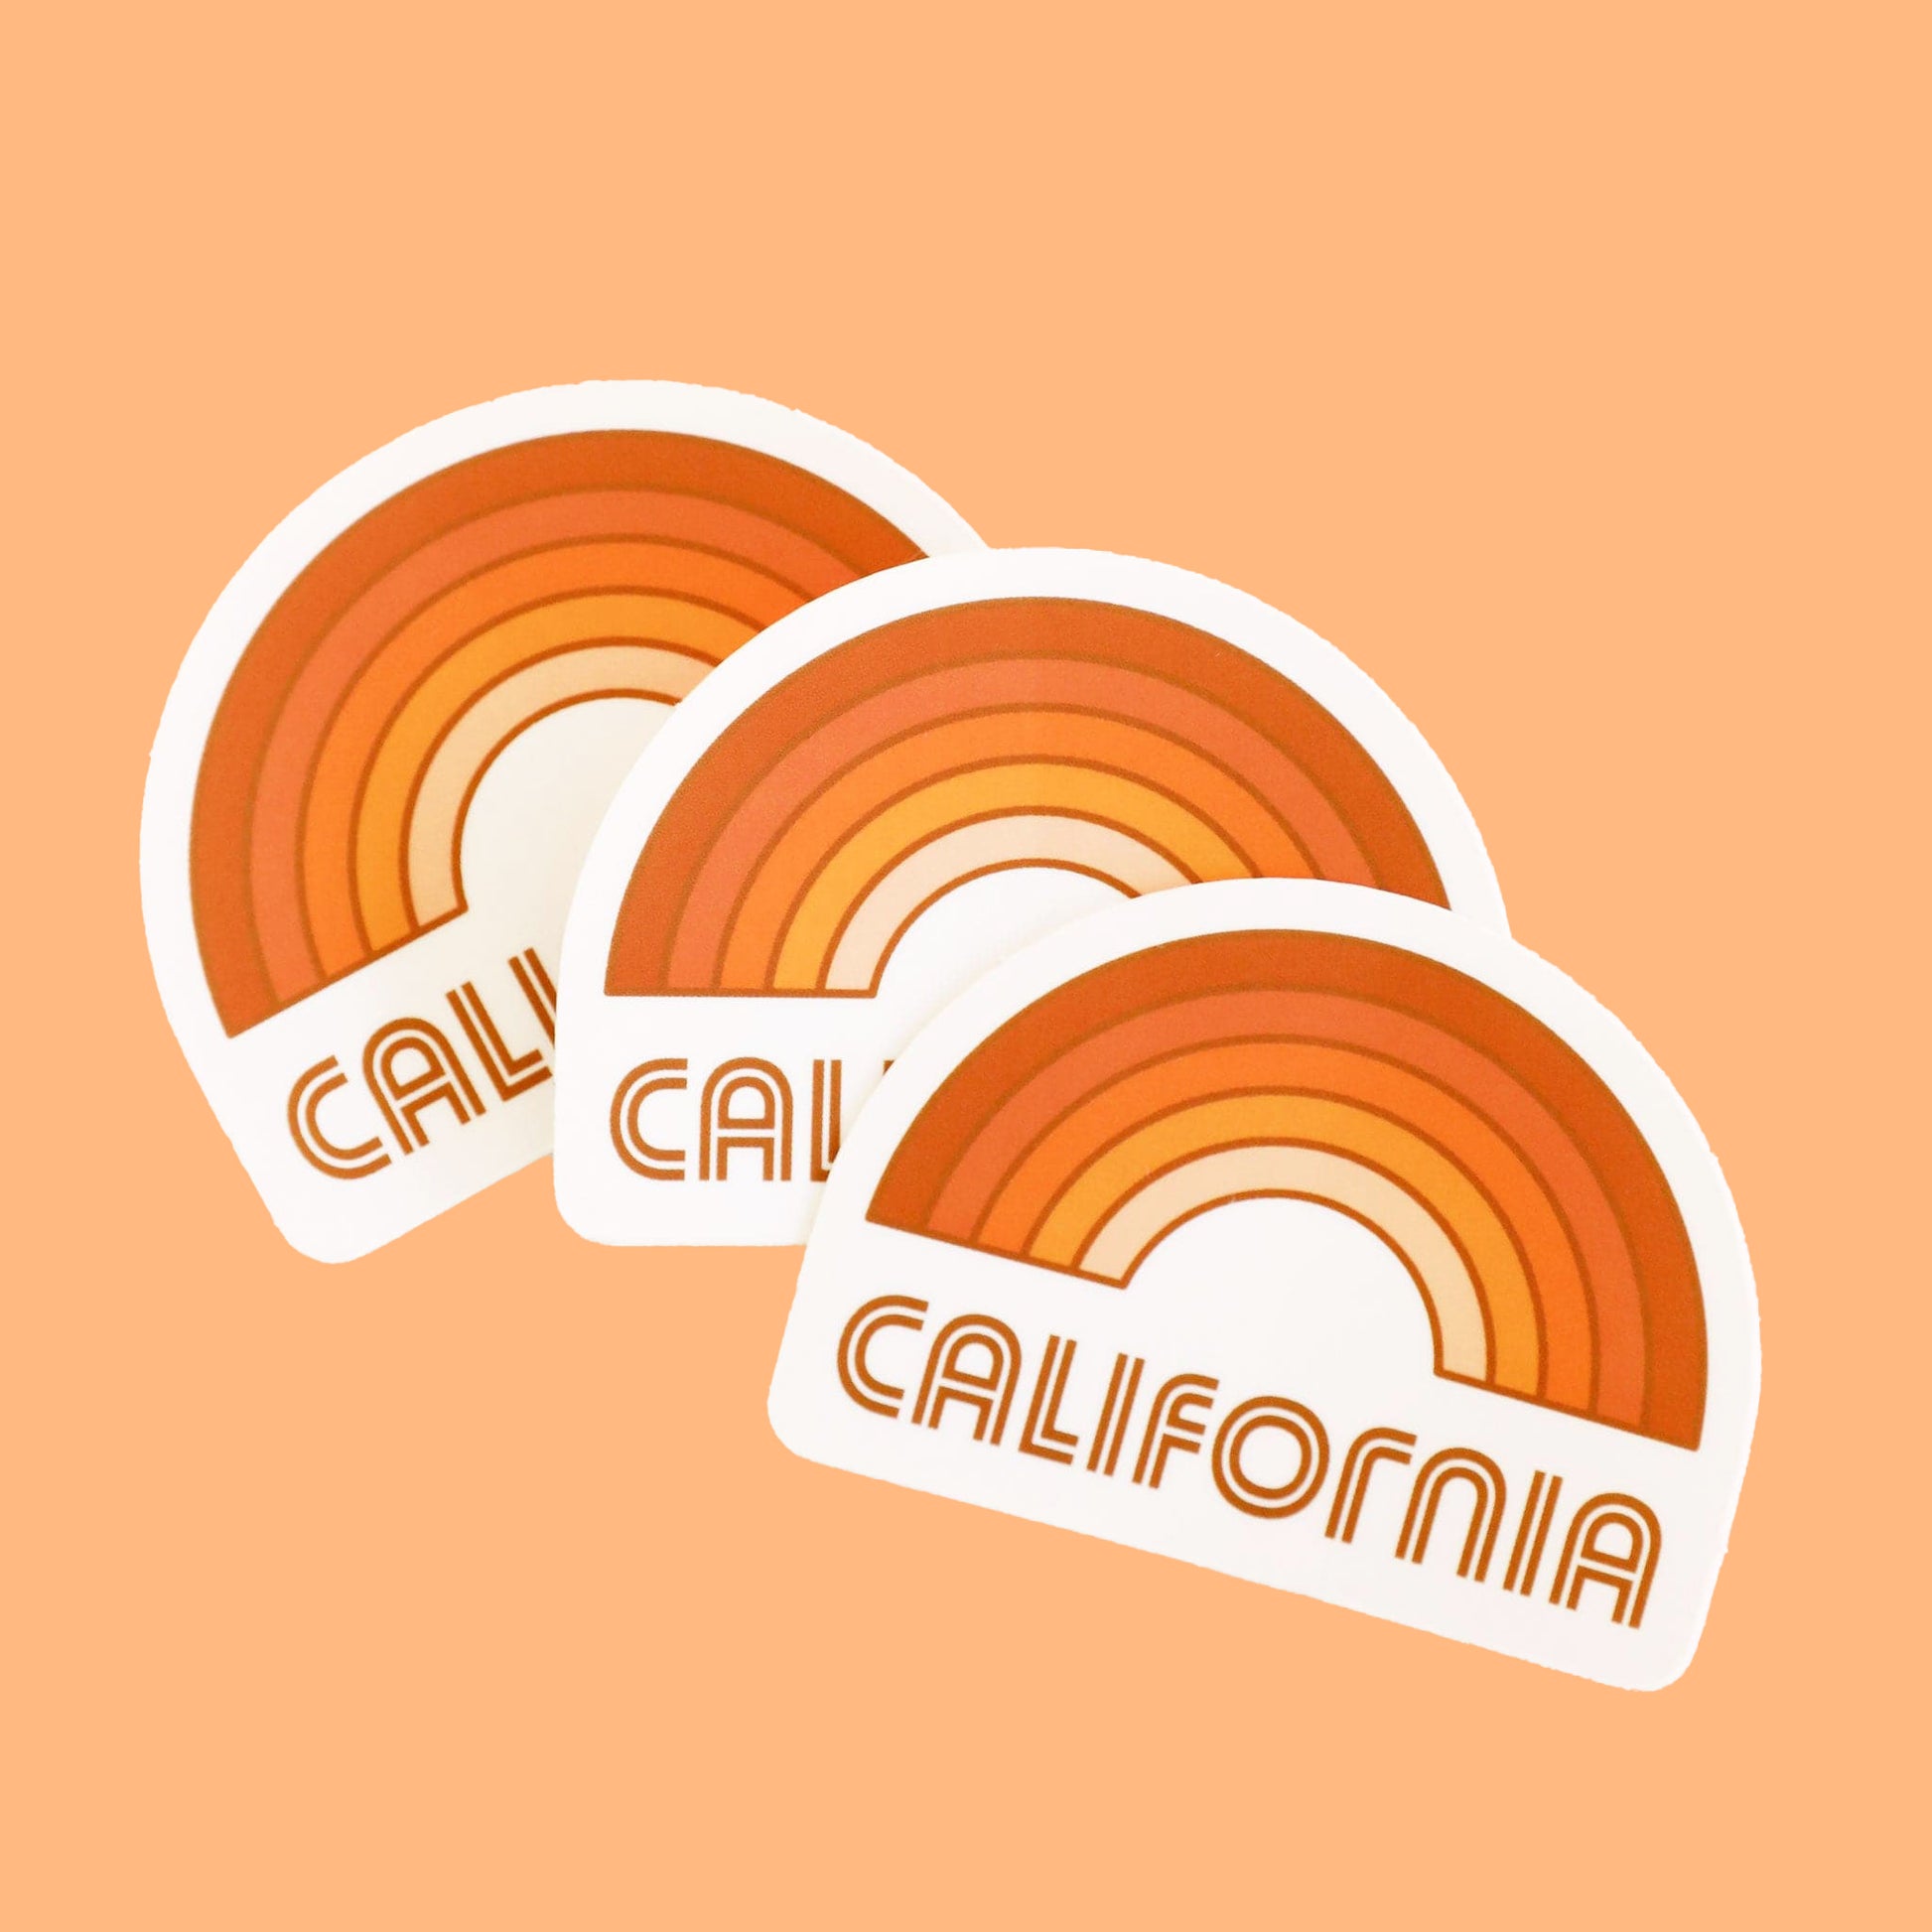 A rainbow sticker made up of different shades of orange and "California" written in orange letters on the bottom underneath the rainbow graphic.